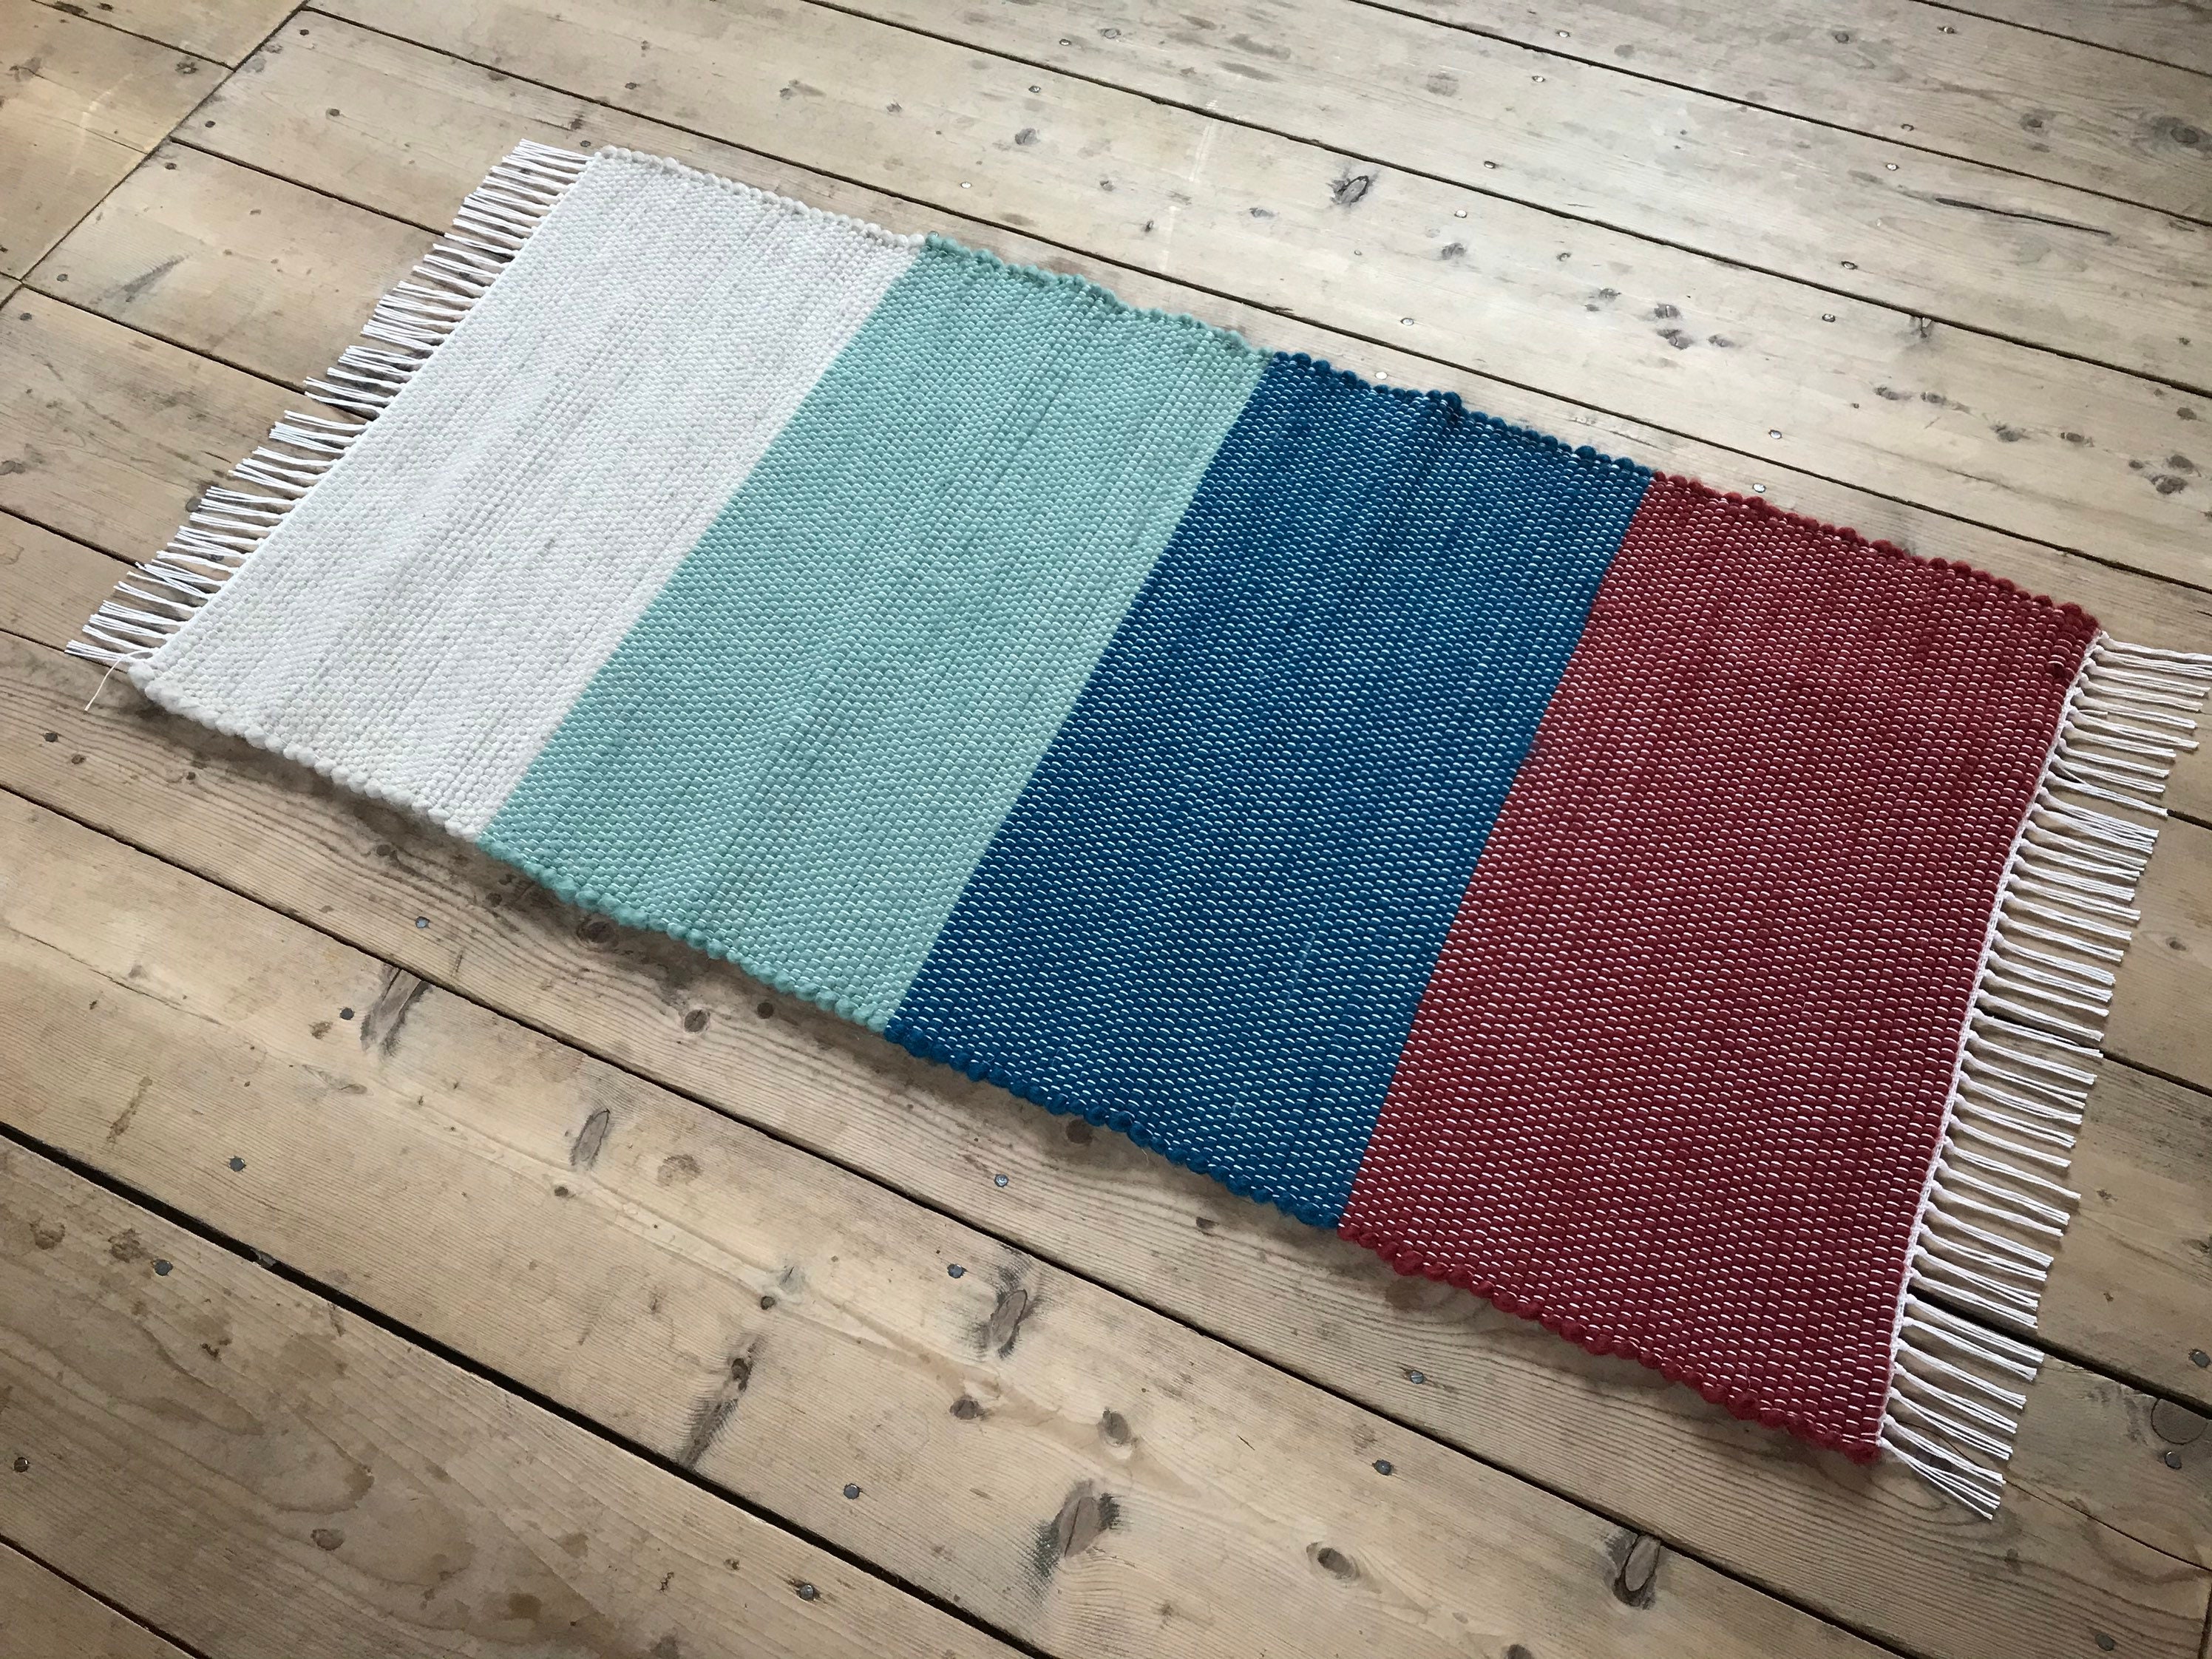 VERMONT WOVEN 2x 4ft Wool Rug / Tan Wool, Soft Green Wool, Blue Wool, Red  Wool 